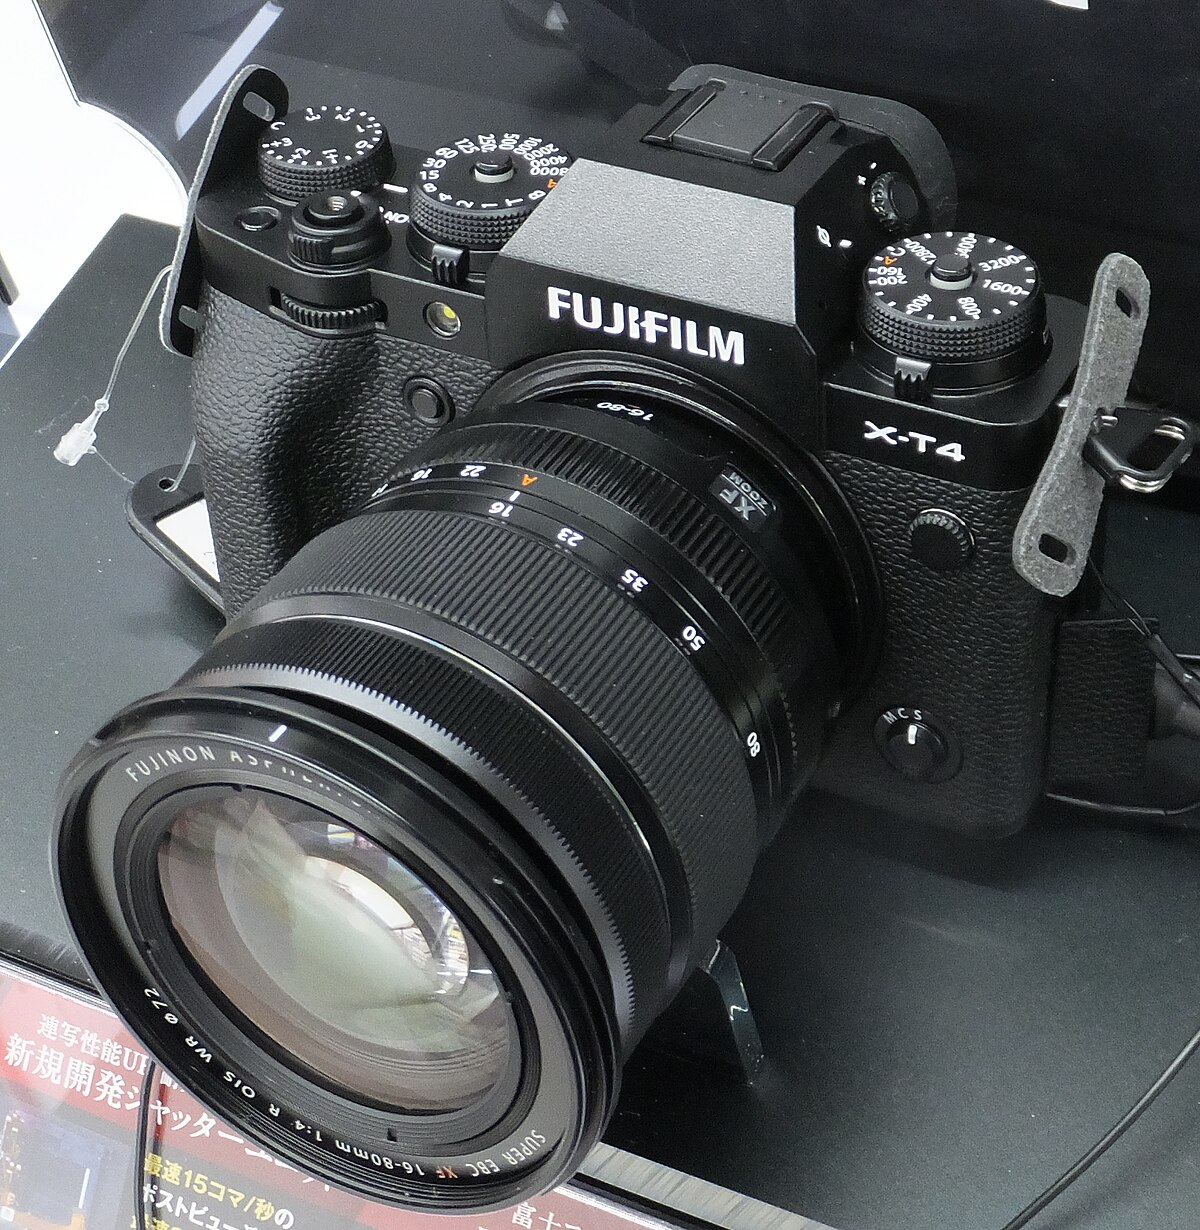 Fujifilm X-T4 announced with in-body image stabilization and flip